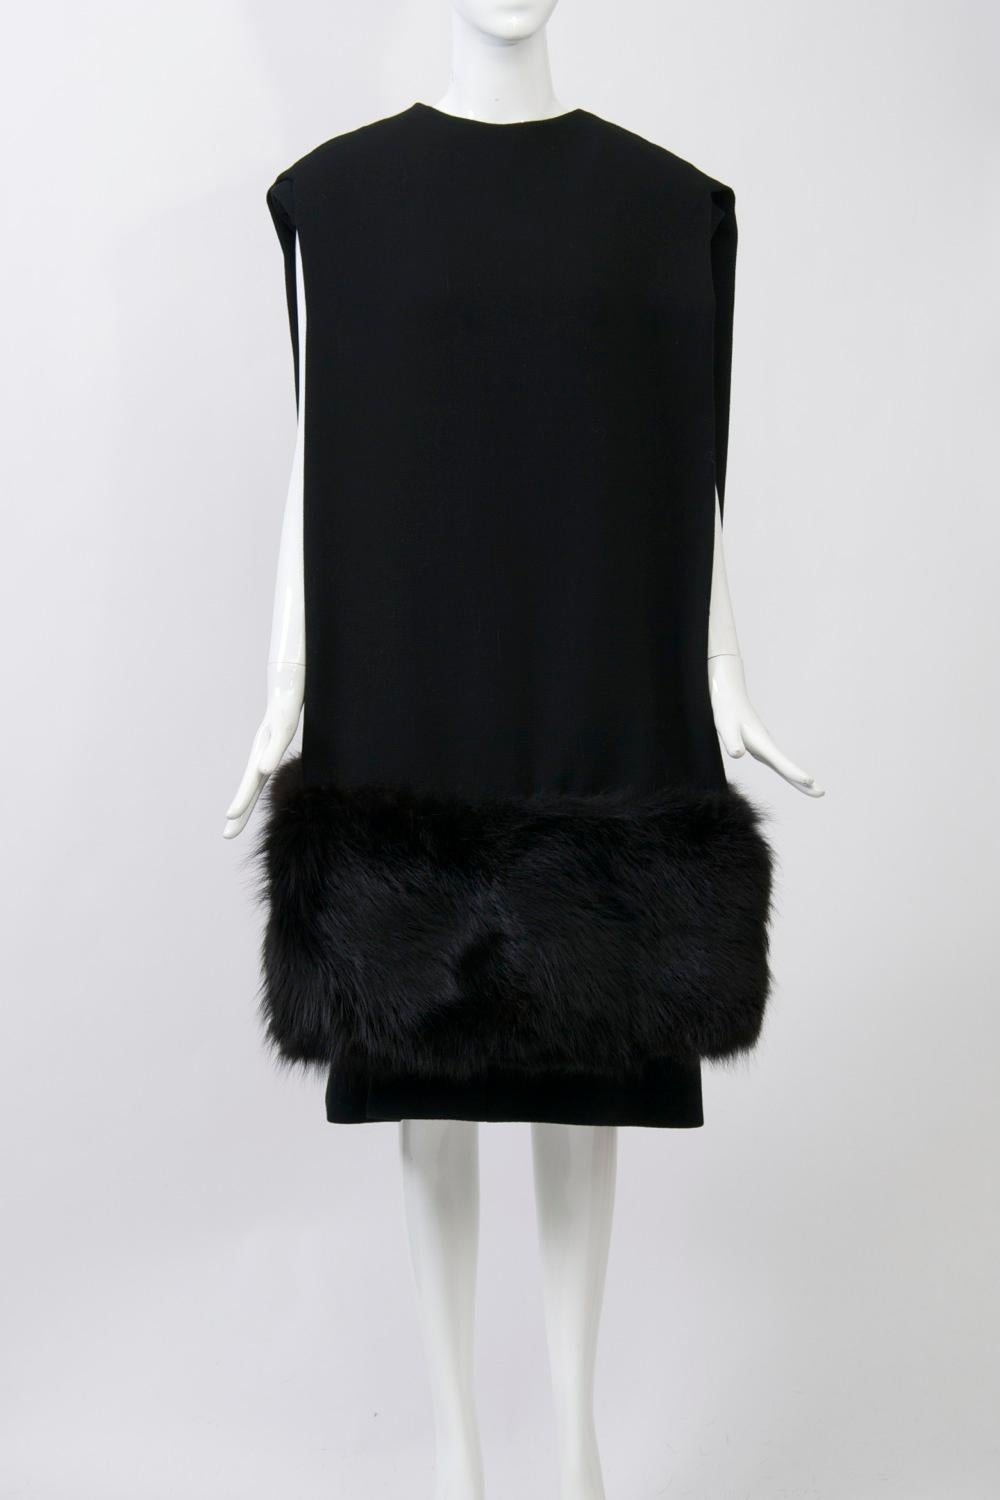 Stunning Pauline Trigère 1970s ensemble in black wool crepe, the simple dress underneath an unusual reverse cape/shawl terminating in deep black fox trim at the hems. The cape can be worn with the opening back or front, but looks most dramatic with